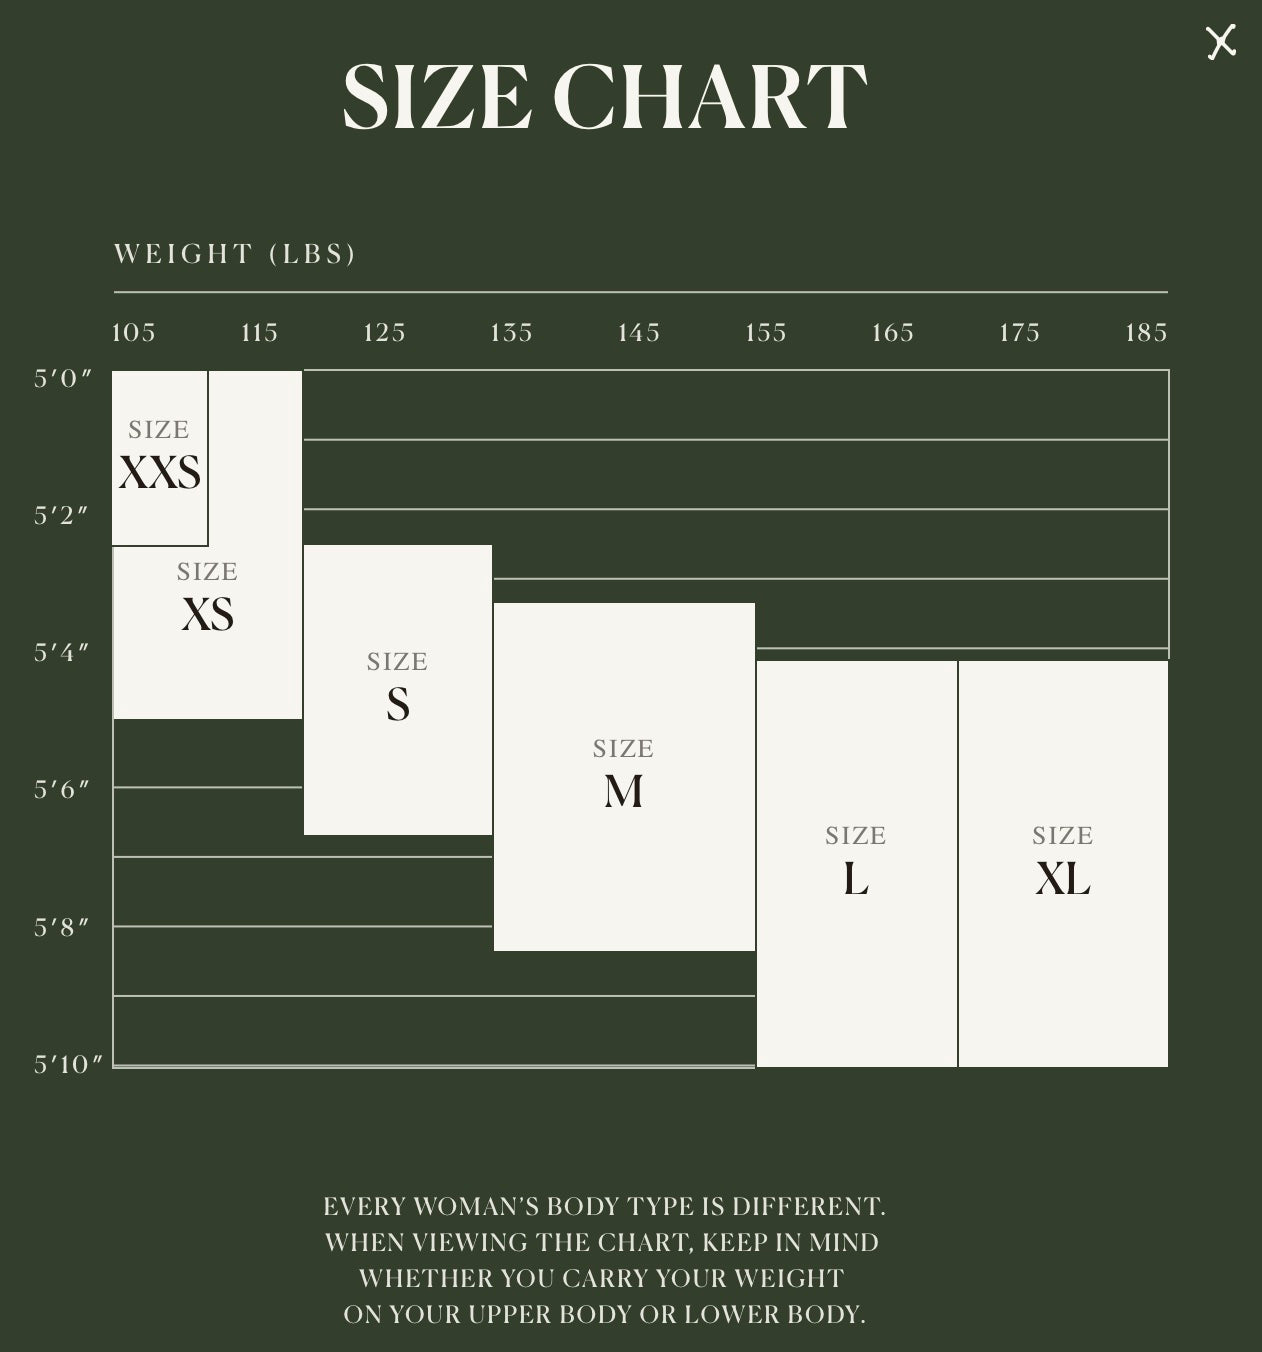 A size chart illustrating the relationship between height, weight, and clothing sizes from xs to xl for women's garments.